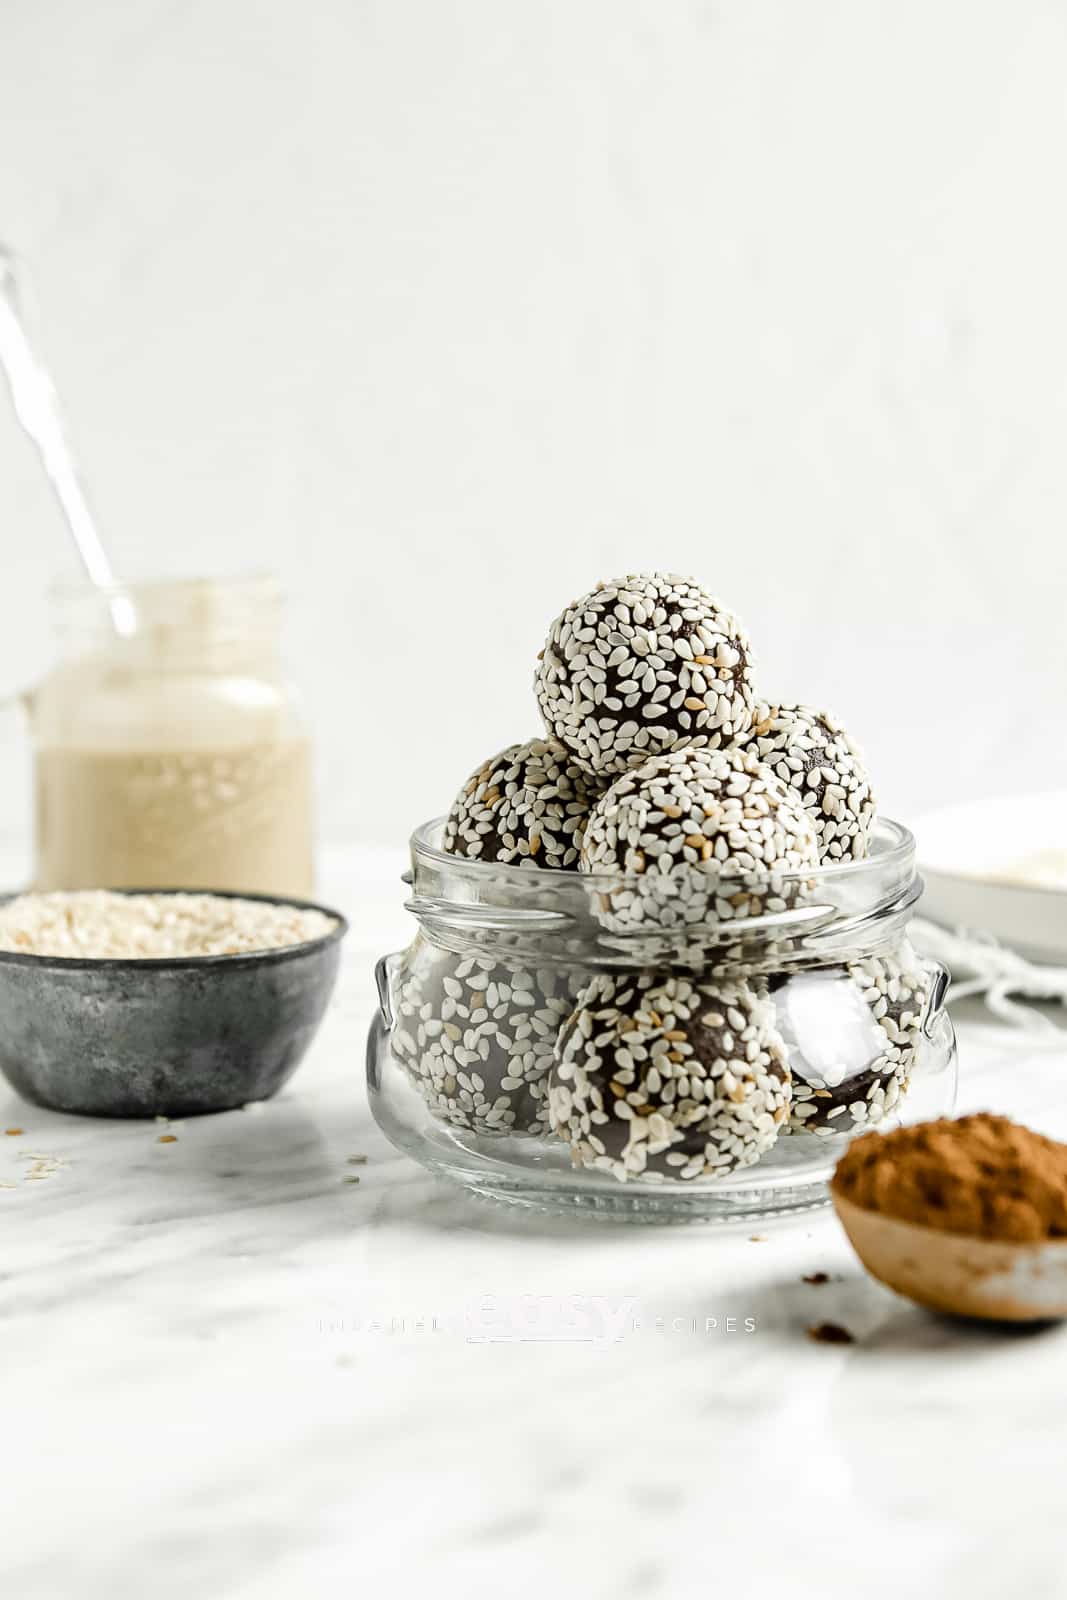 photo of bliss balls in a clear canning jar, with a spoon filled with cocoa powder in the foreground and a small silver bowl of almond flour, a mason jar of tahini paste with a spoon in the jar, and a white plate in the background